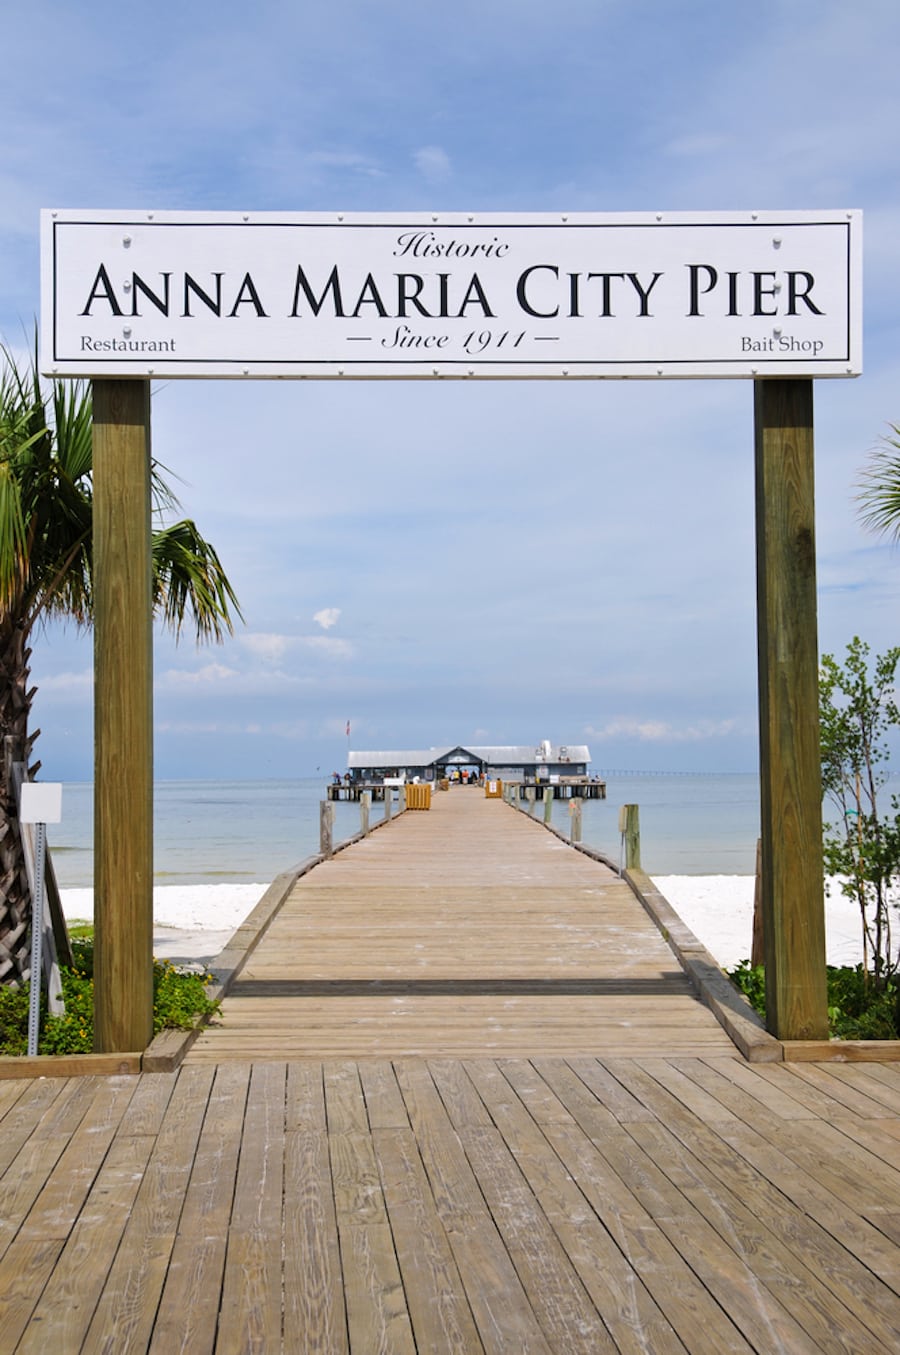 A sign showing the anna maria pier sign another great place to explore on your trip!